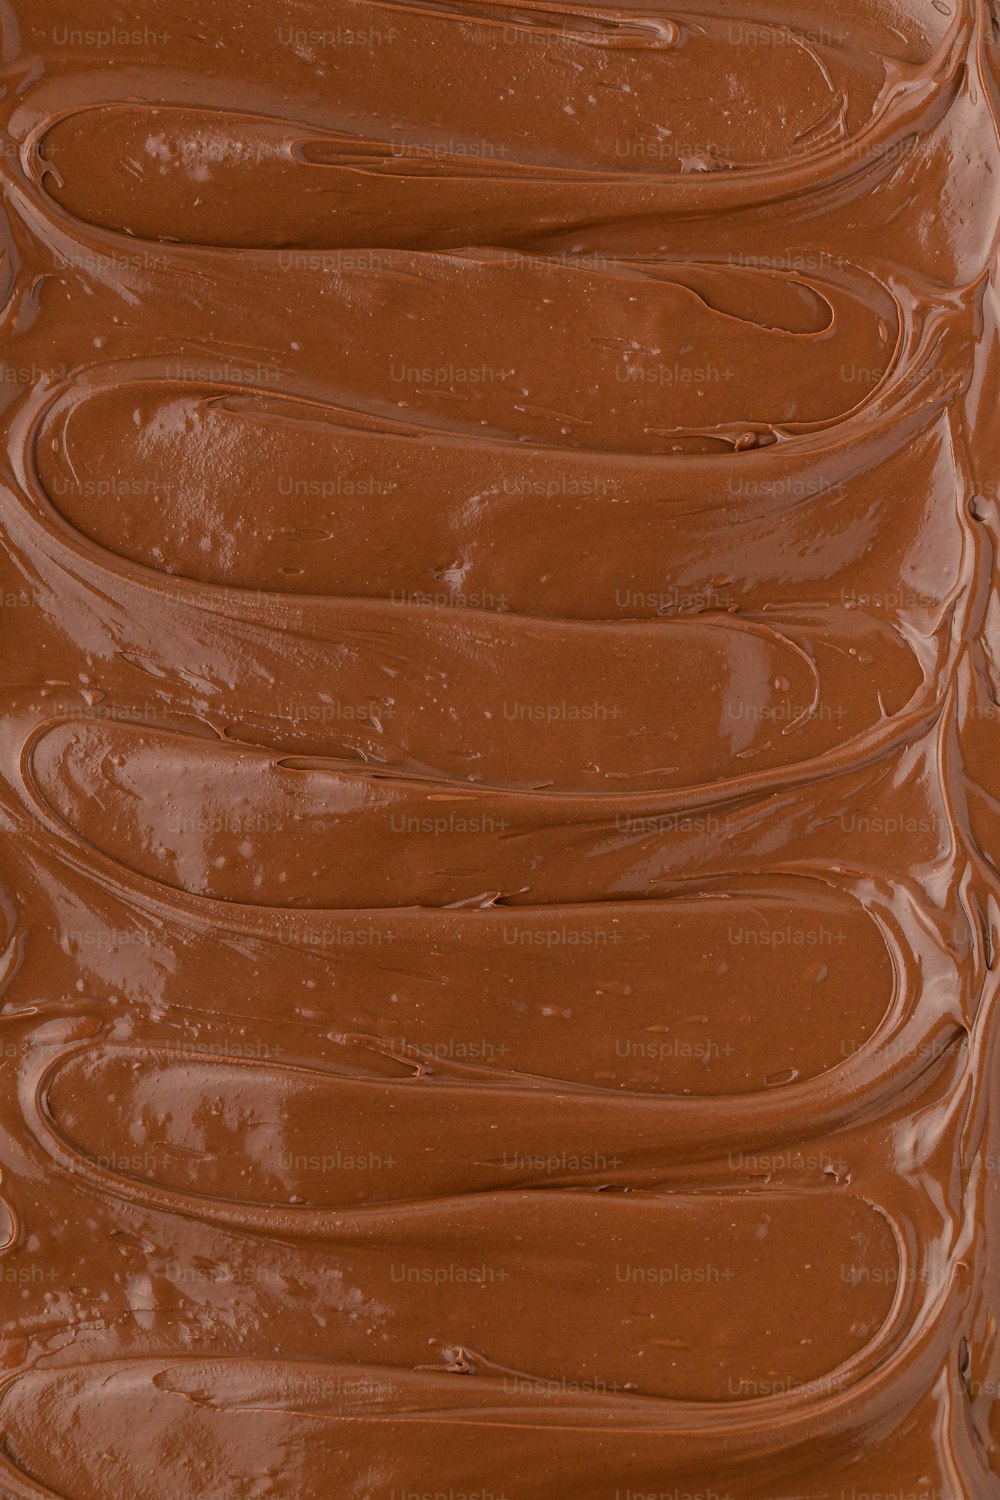 a close up of a cake with chocolate frosting